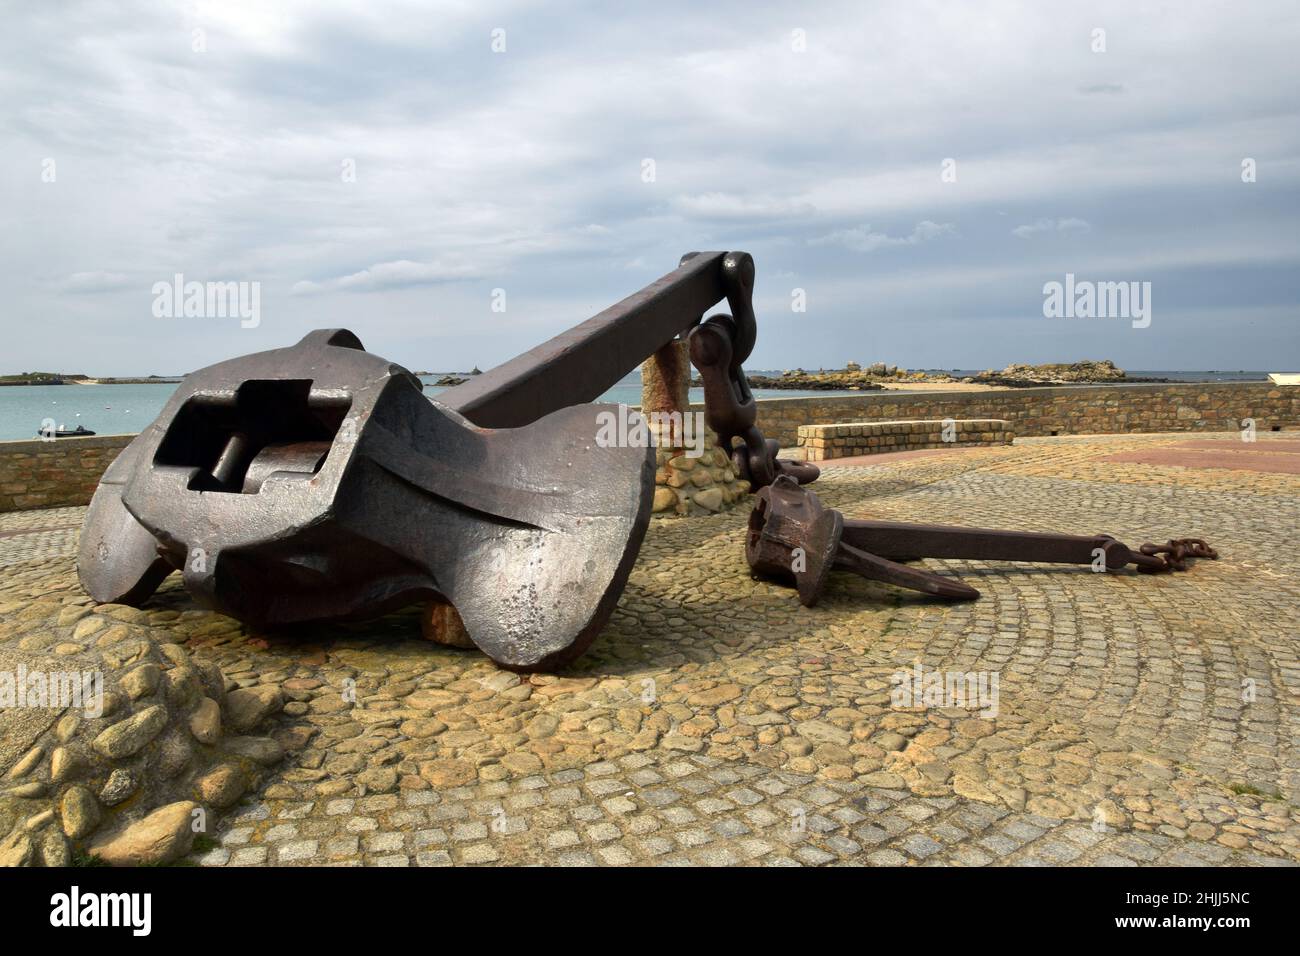 The anchor of the supertanker Amoco Cadiz in Pouldamezeau, France. This tanker collapsed on the coastline in 1978, hence a catastrophic oil slick. Stock Photo